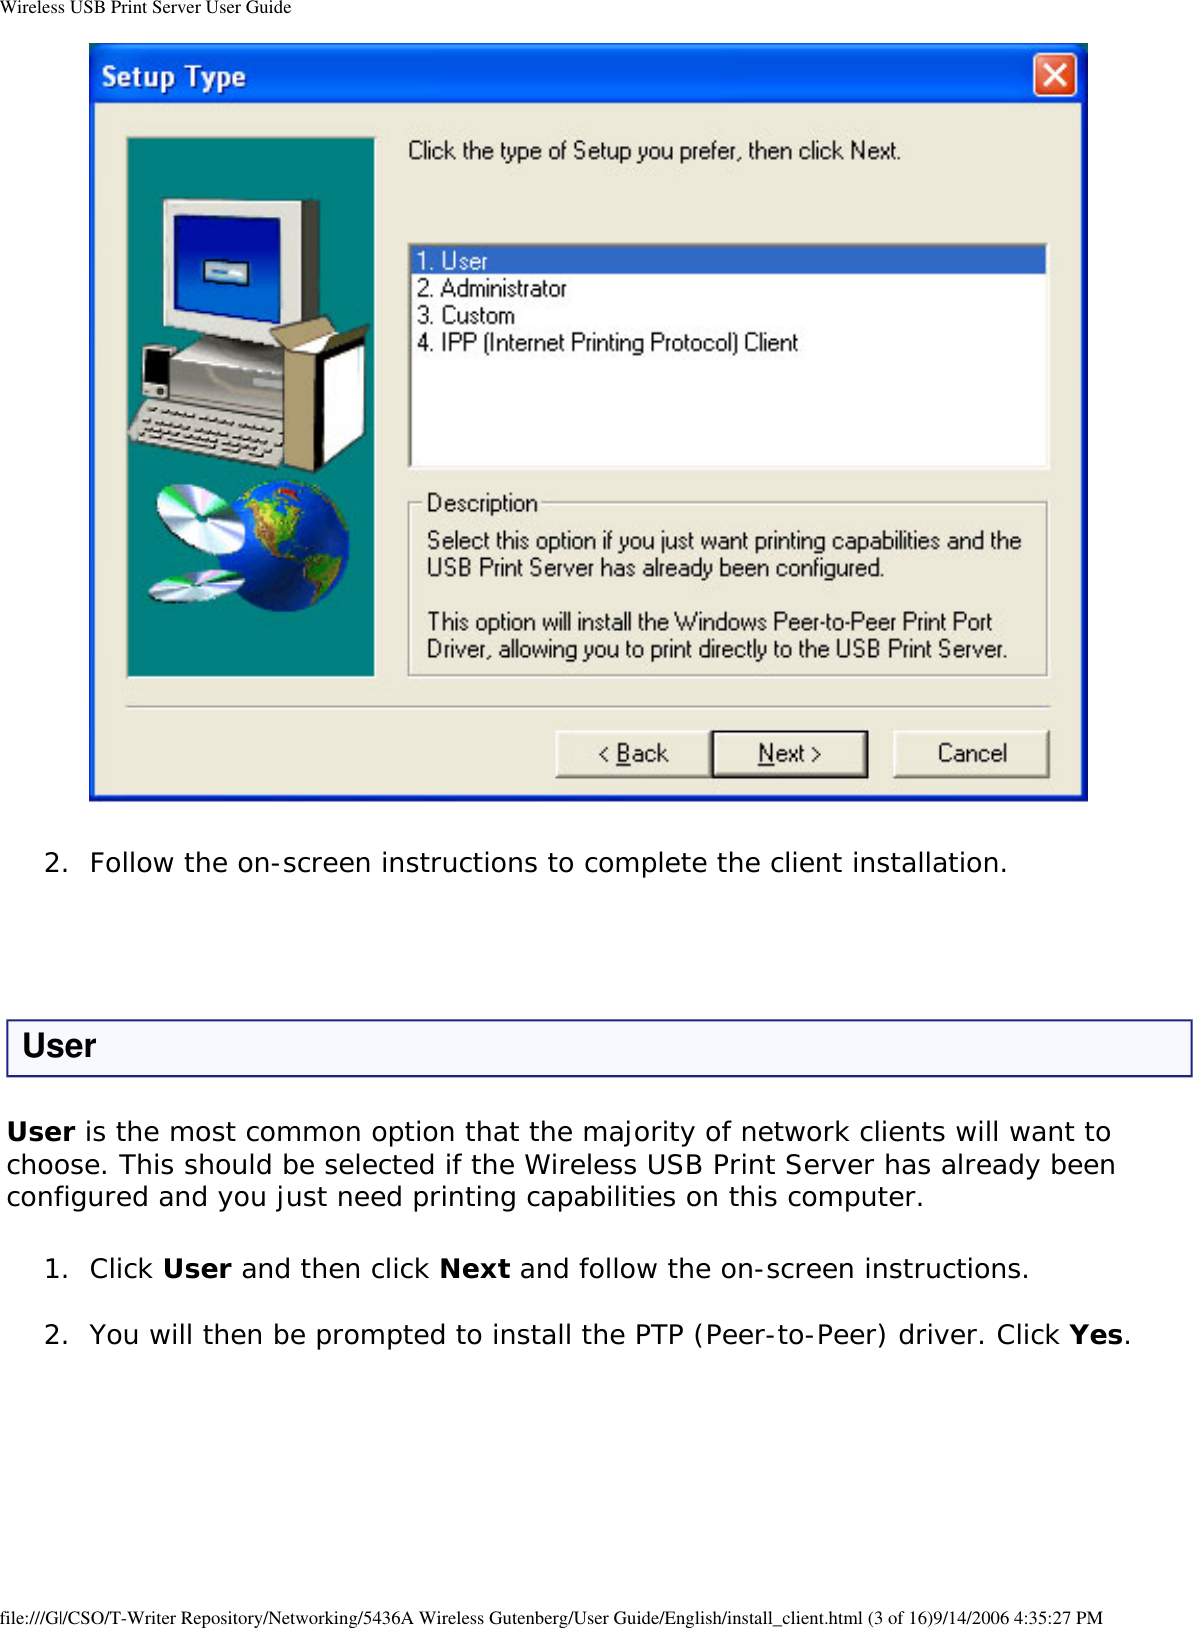 Wireless USB Print Server User Guide 2.  Follow the on-screen instructions to complete the client installation.  User User is the most common option that the majority of network clients will want to choose. This should be selected if the Wireless USB Print Server has already been configured and you just need printing capabilities on this computer.1.  Click User and then click Next and follow the on-screen instructions. 2.  You will then be prompted to install the PTP (Peer-to-Peer) driver. Click Yes.  file:///G|/CSO/T-Writer Repository/Networking/5436A Wireless Gutenberg/User Guide/English/install_client.html (3 of 16)9/14/2006 4:35:27 PM